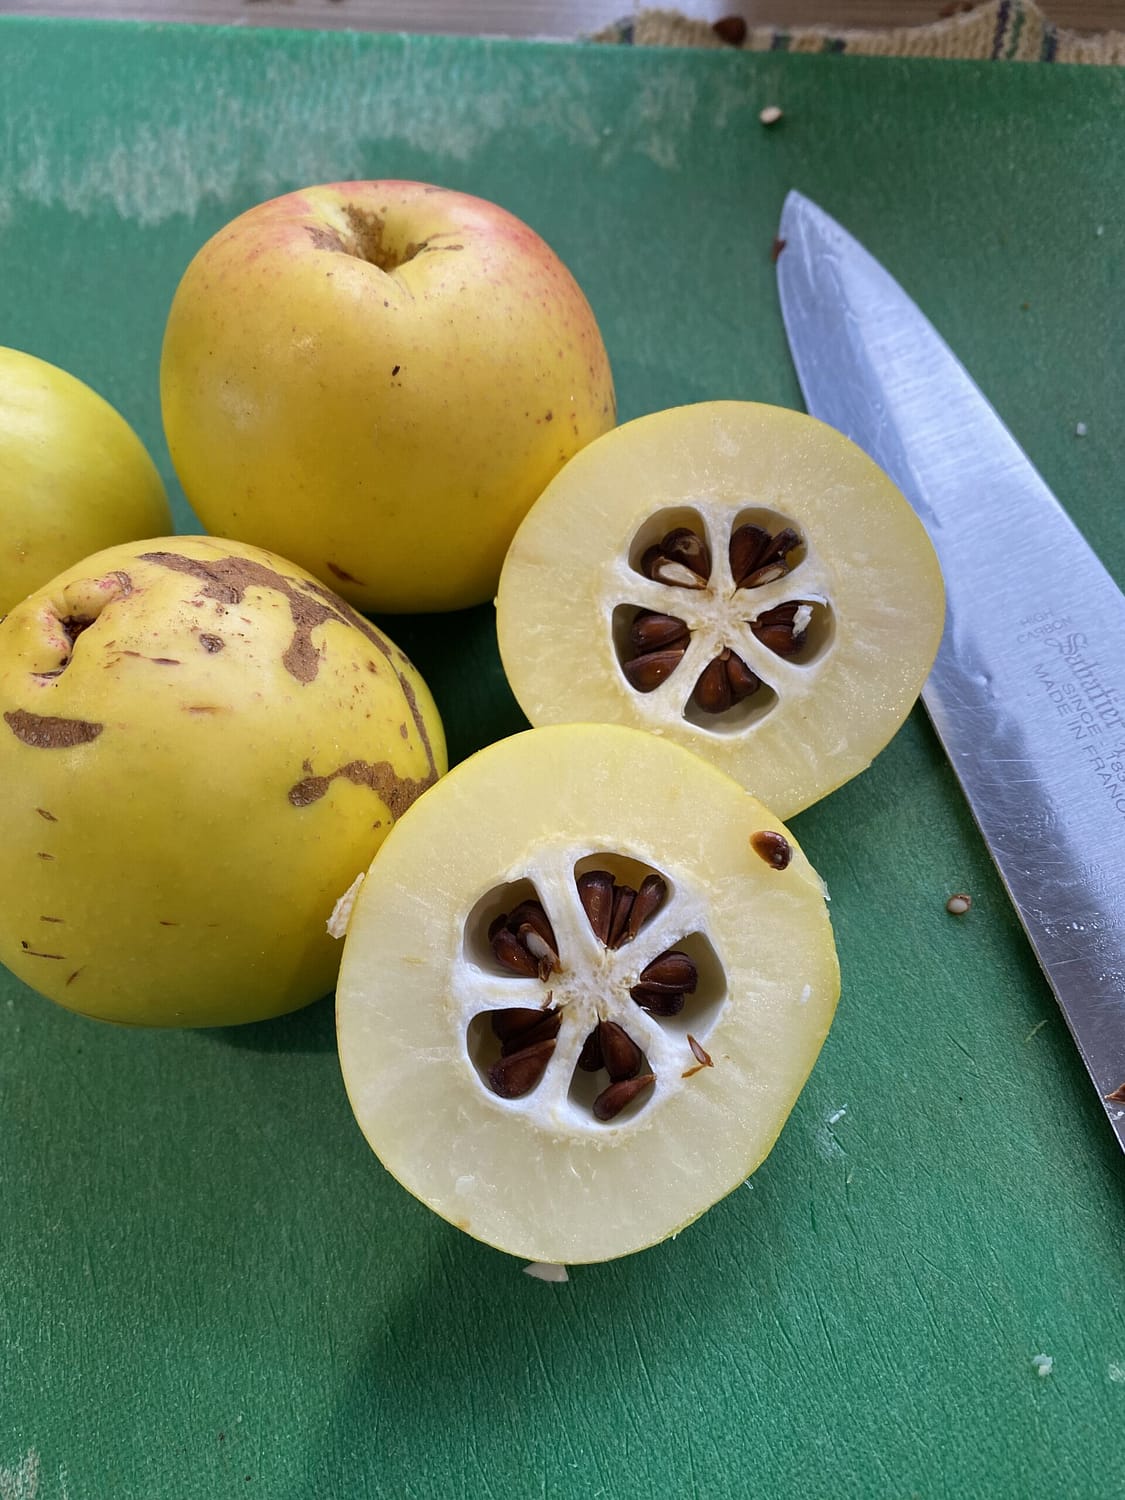 A quince is displayed cut in half on a chopping board showing its interesting core of five pips in a start pattern.